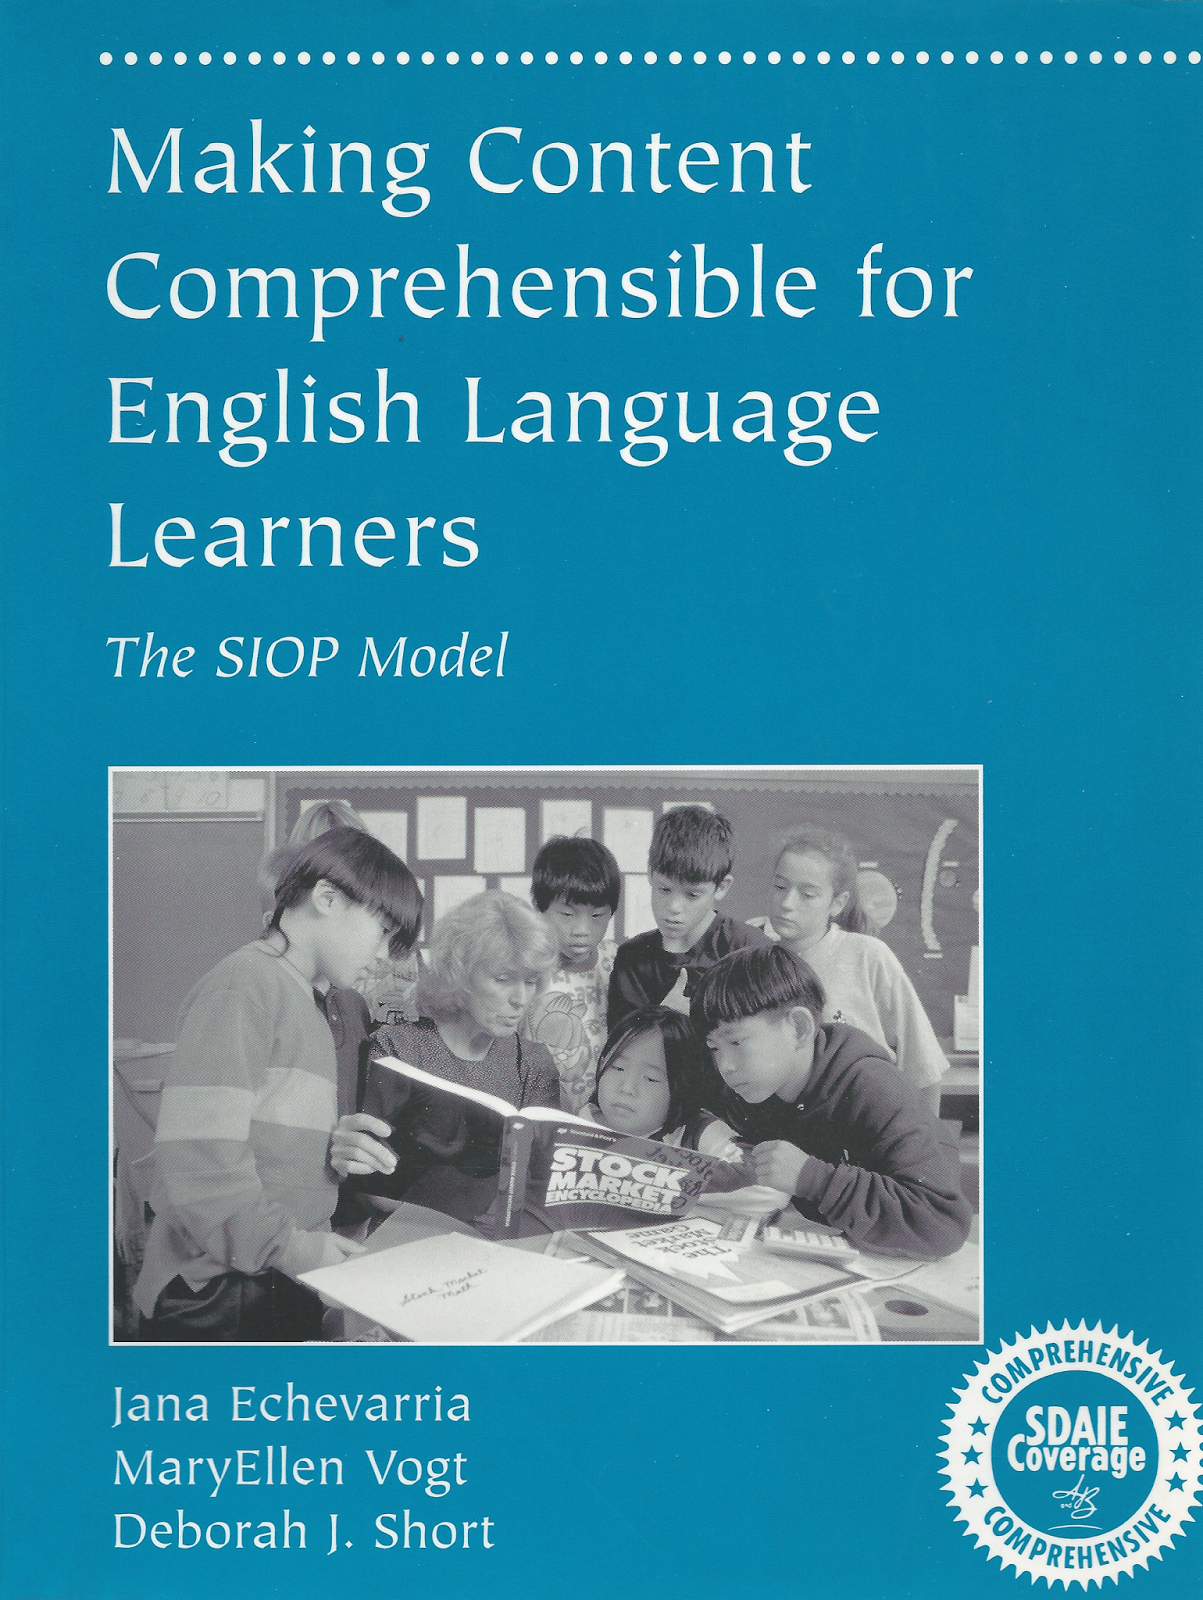 Summer reading: Book recommendations for teachers of English Language Learners, Book #2 | The ESL Nexus